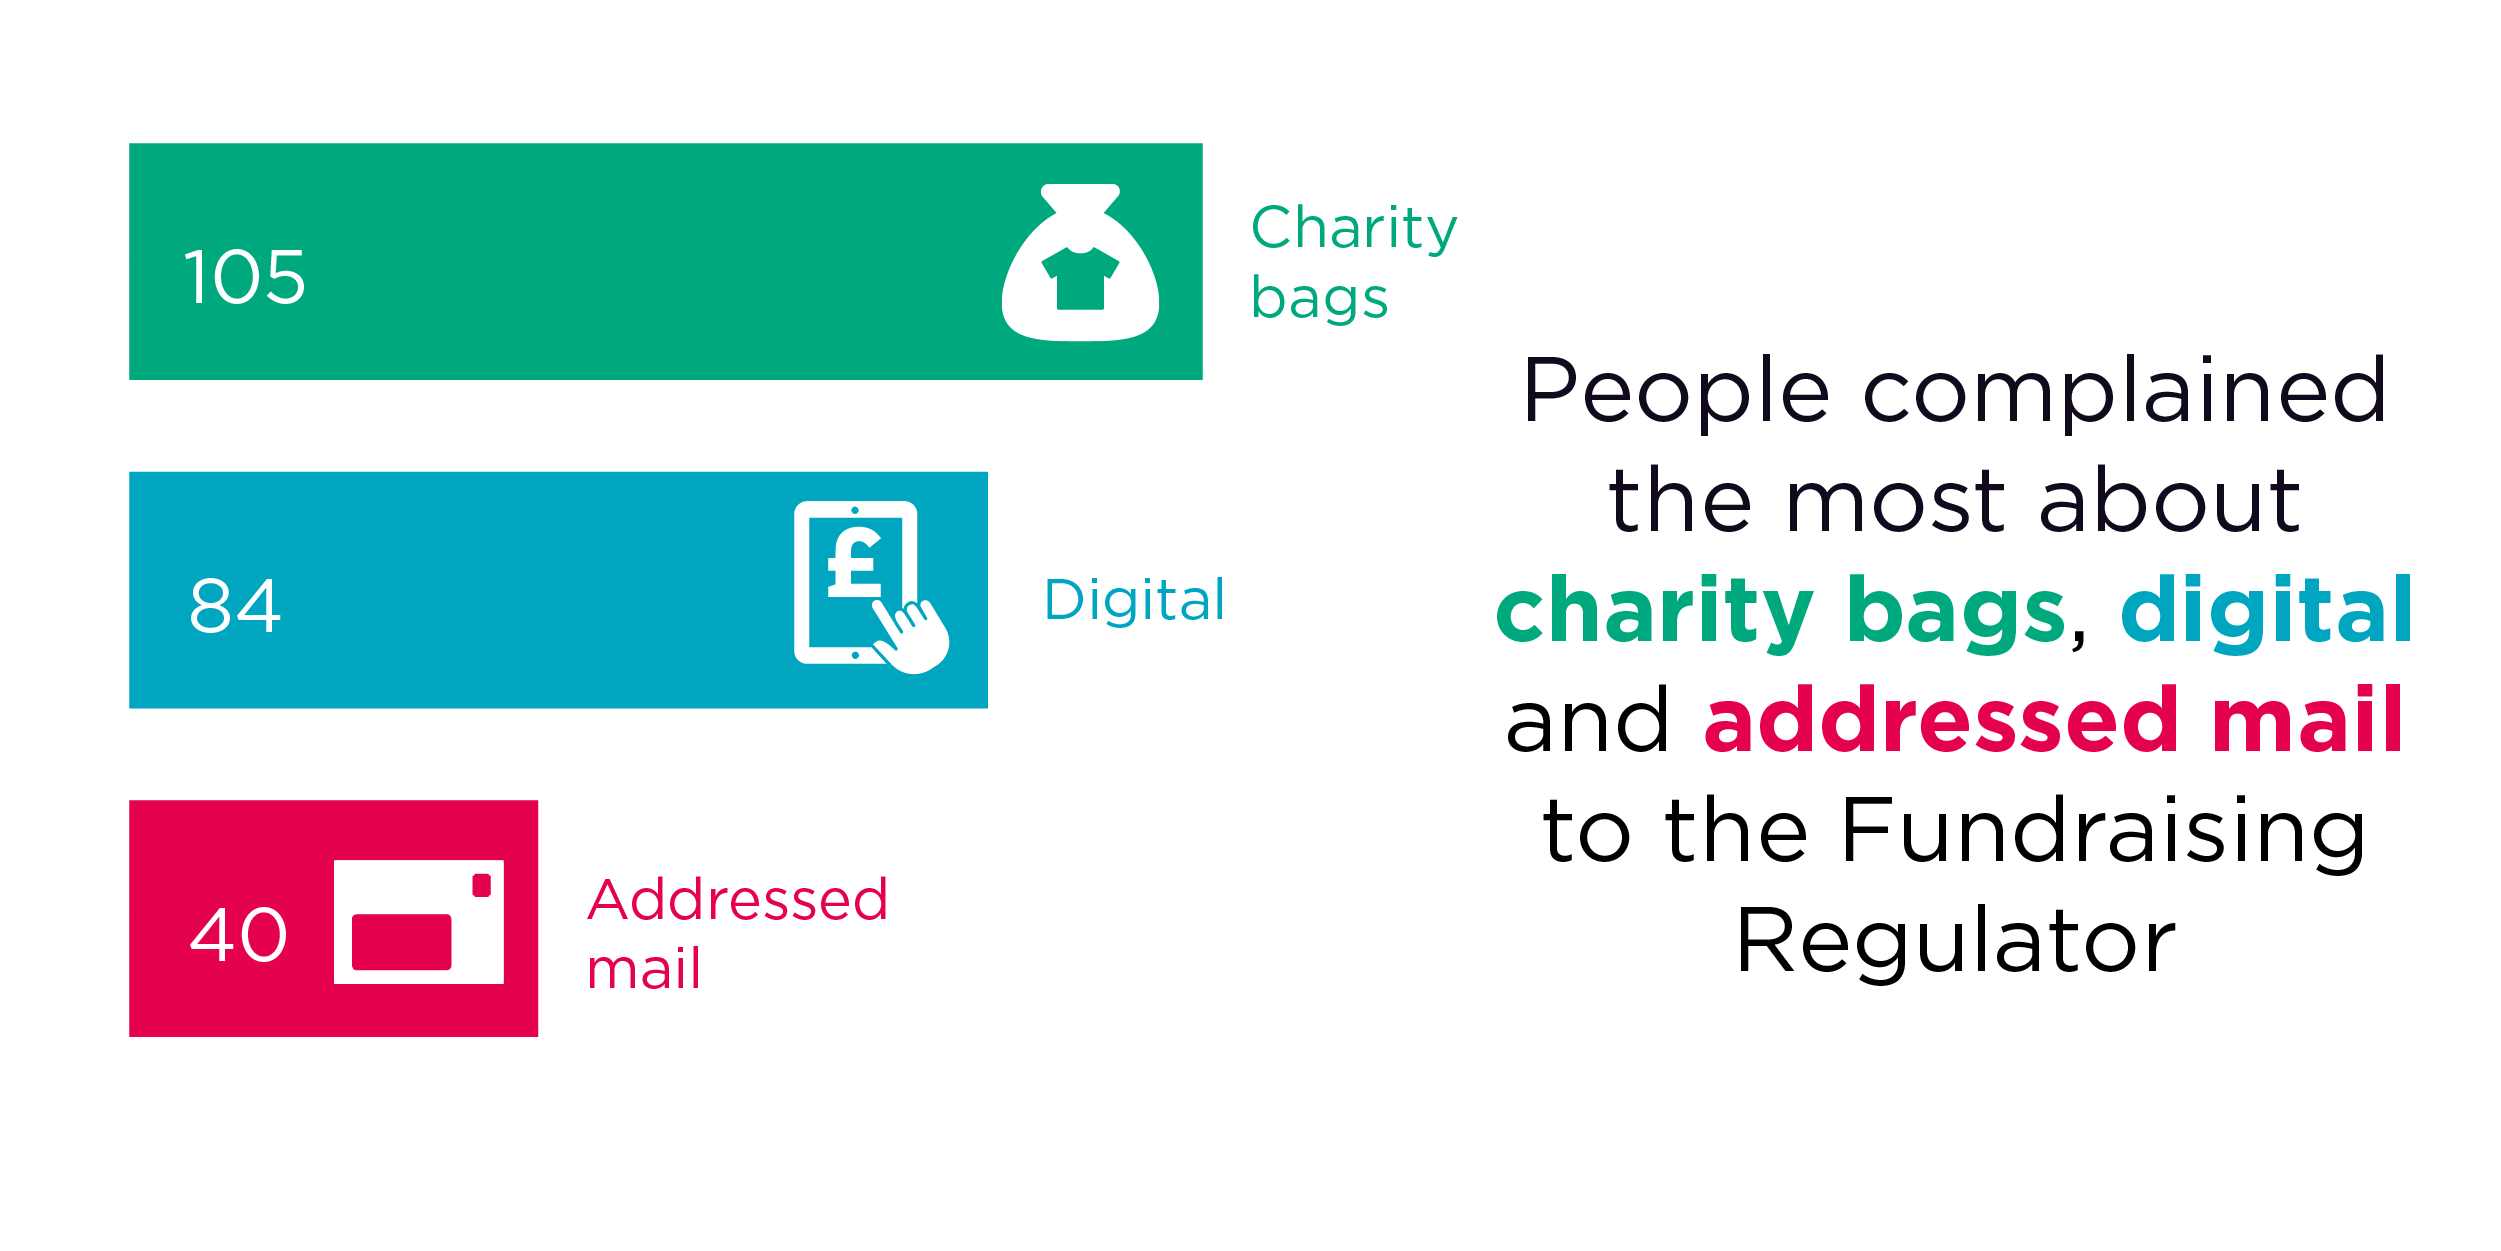 People complained the most about charity bags, digital and addressed mail to the Fundraising Regulator 